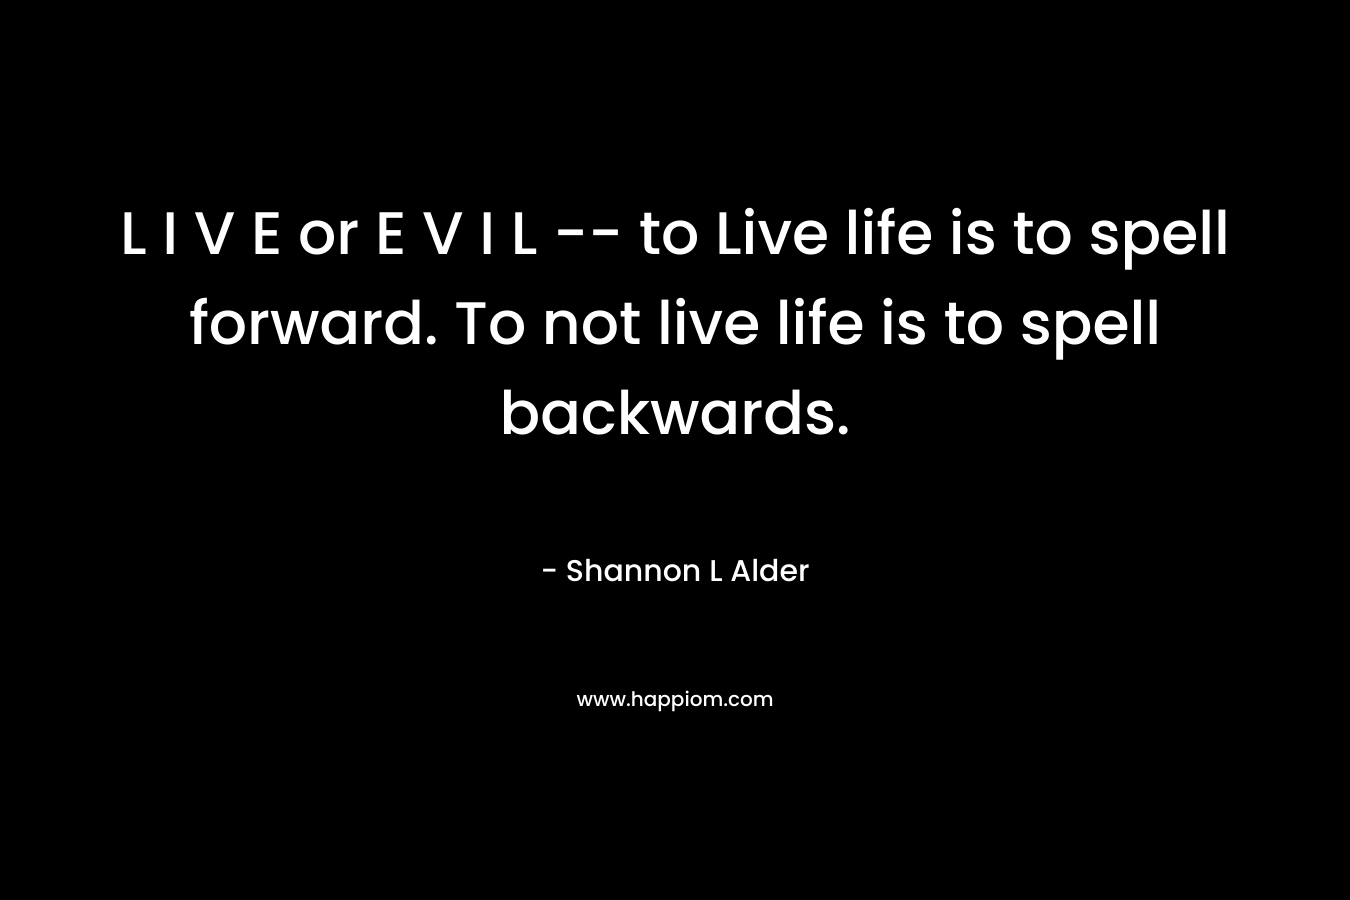 L I V E or E V I L -- to Live life is to spell forward. To not live life is to spell backwards.